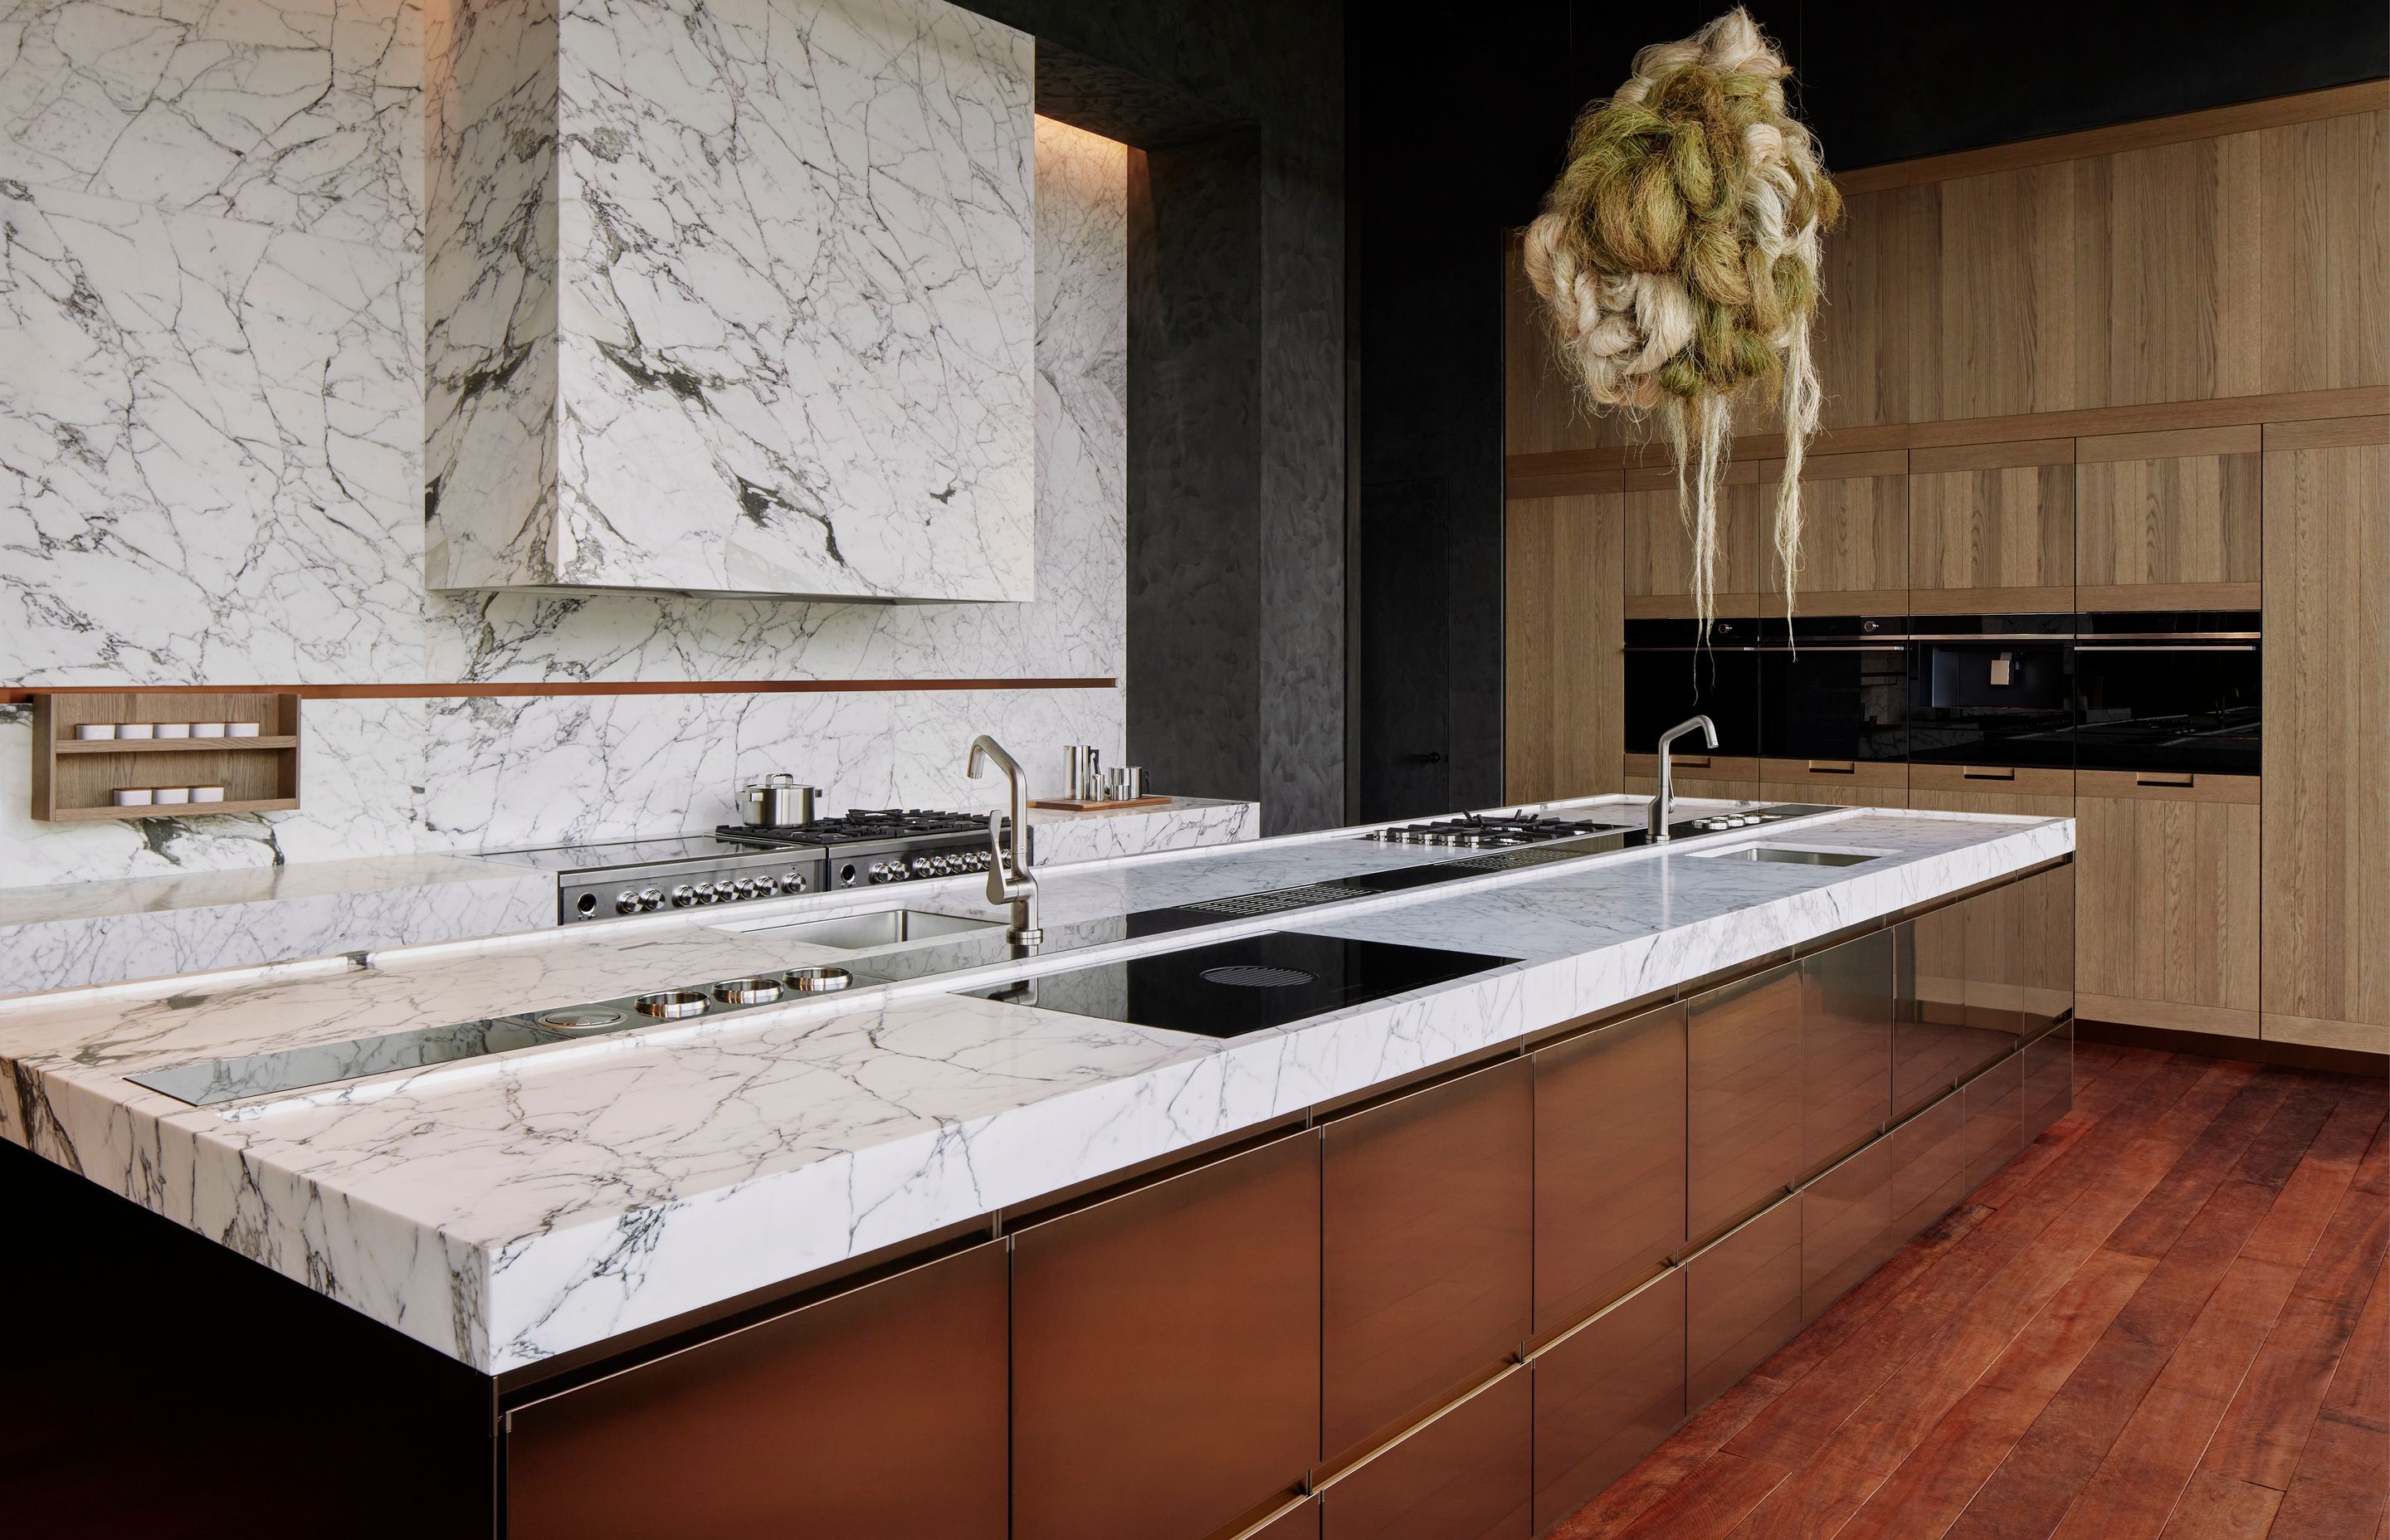 Oozing contemporary elegance, this luxury kitchen is one of multiple designed by international designers.